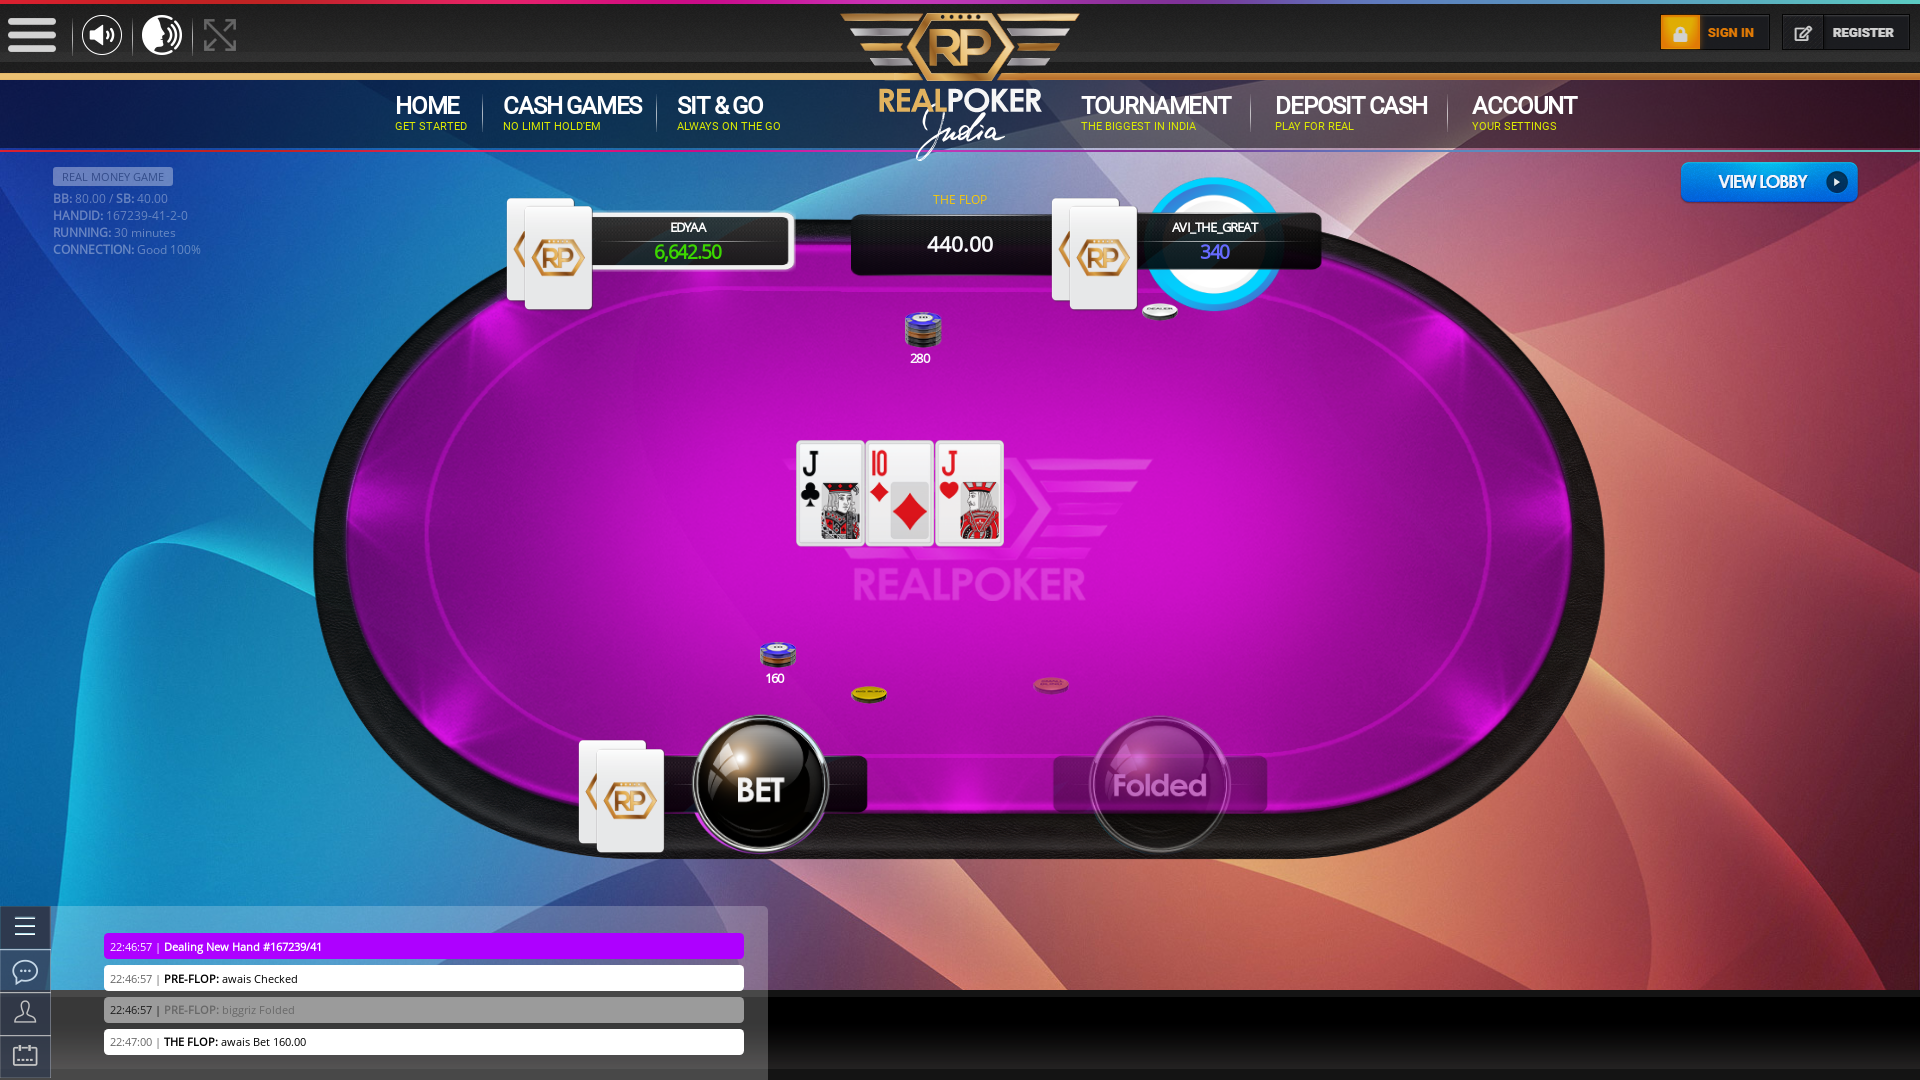 Real poker 10 player table in the 30th minute of the match